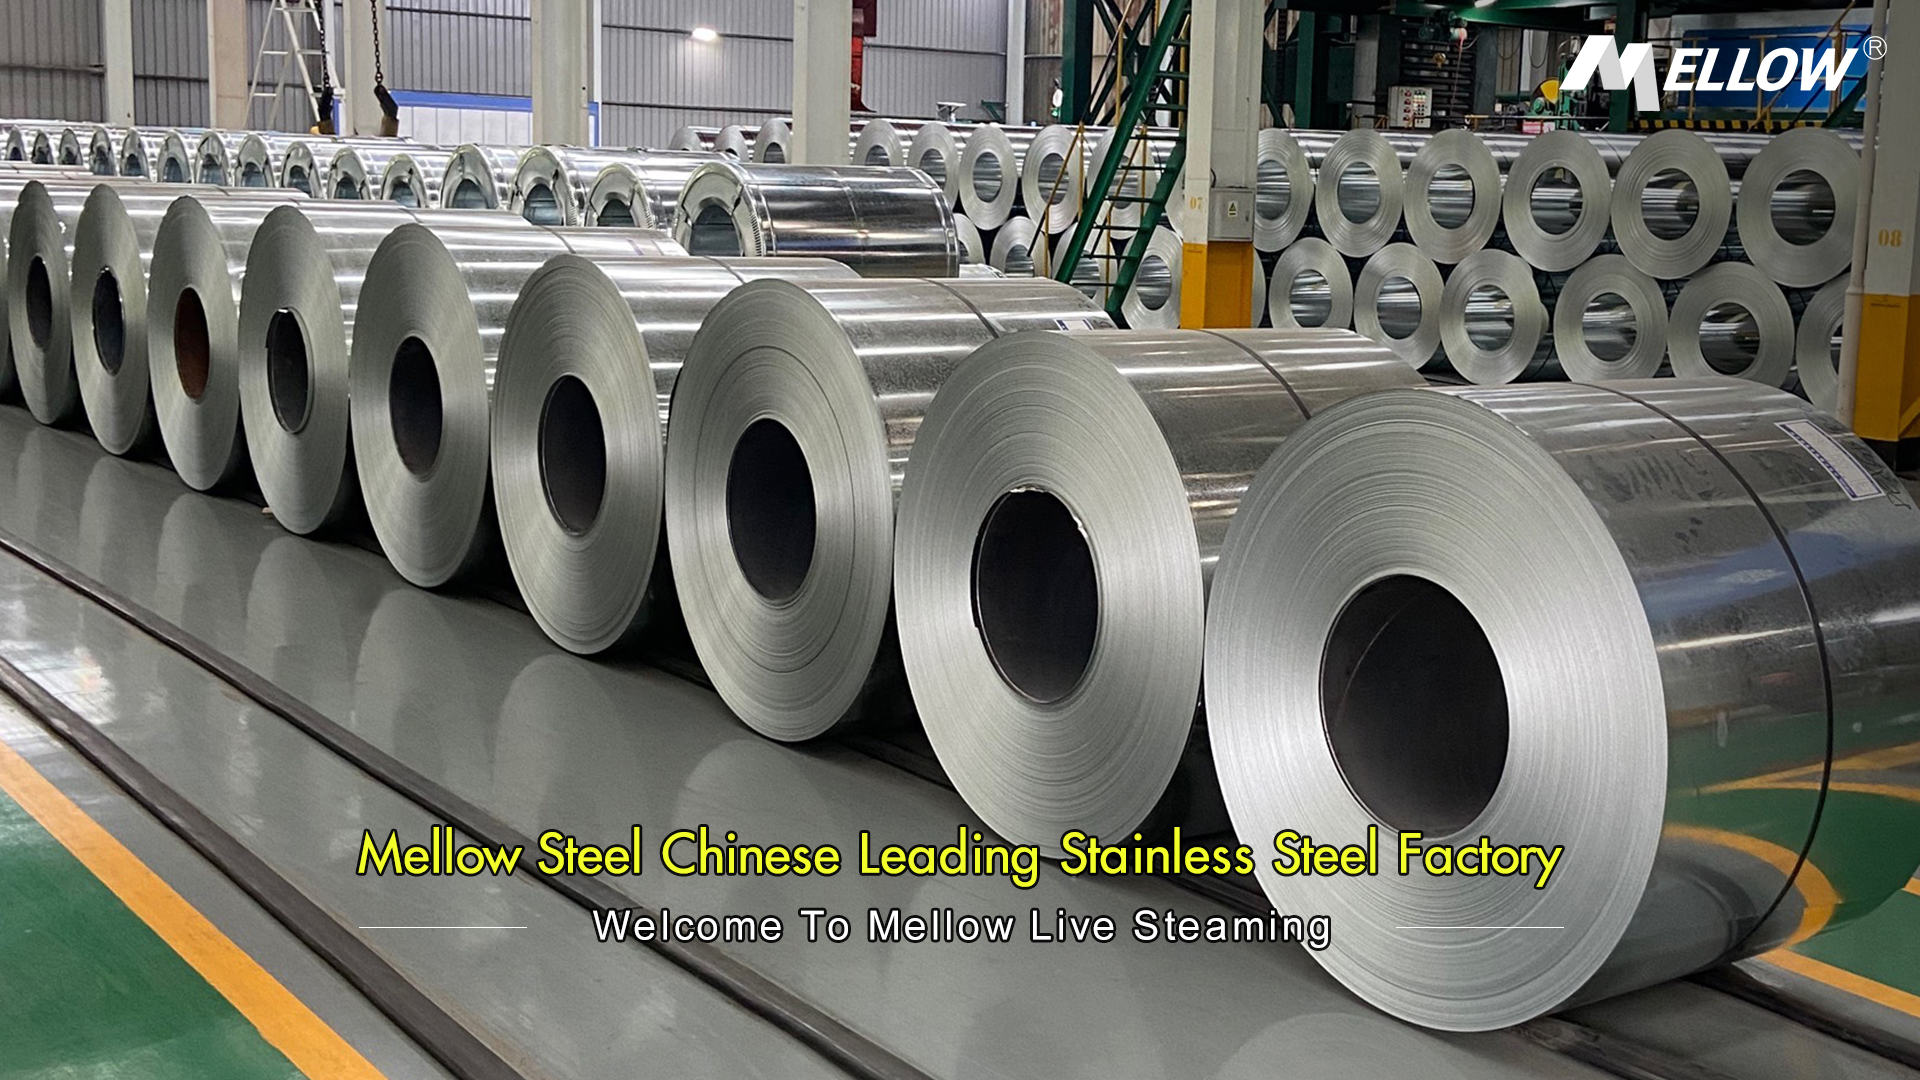 2023 Apr 3 300-series stainless steel scrap quotes stood at around 10,550 yuan/...